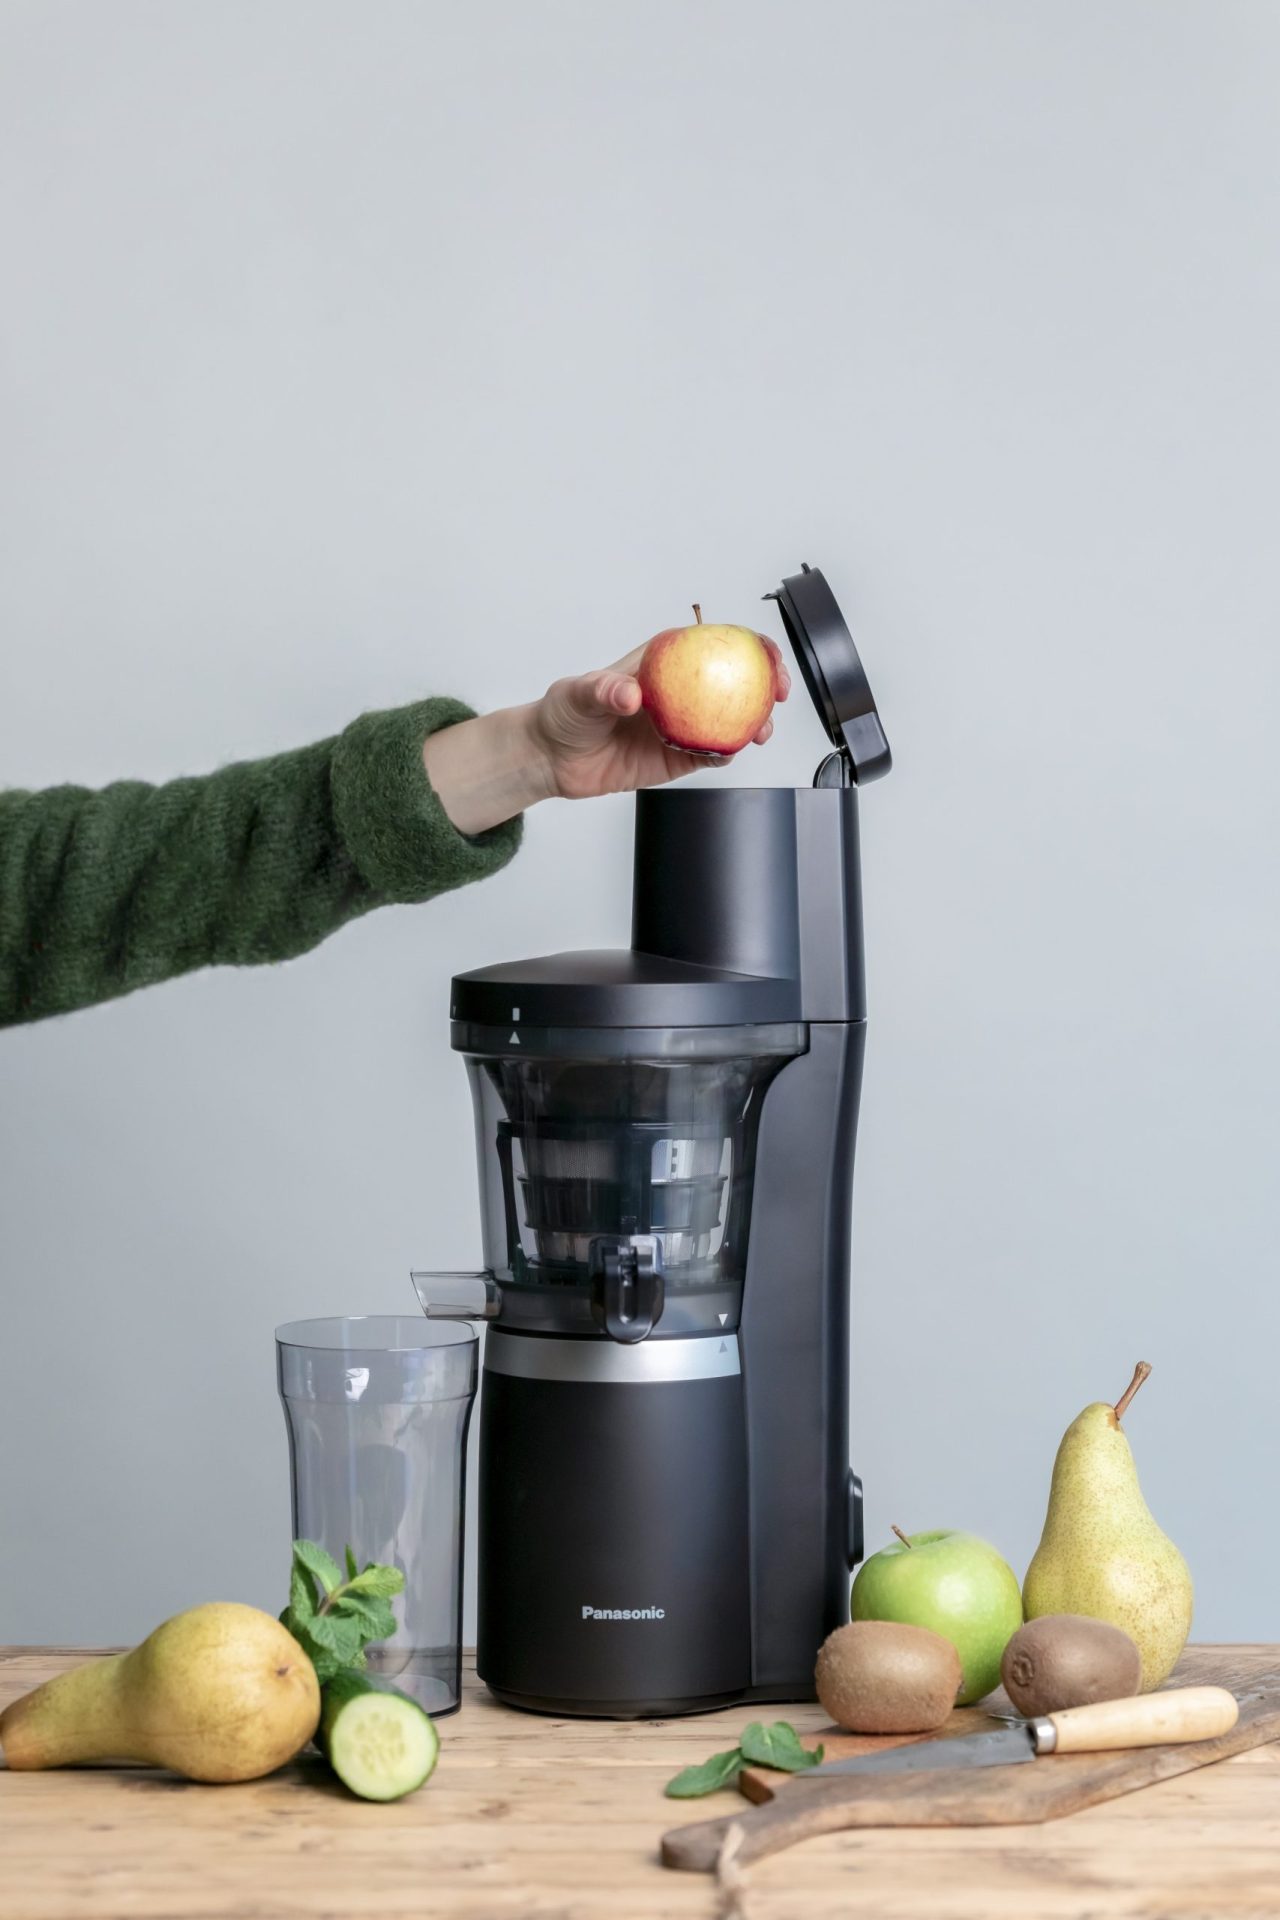 Eat this Panasonic Slow Juicer Keyvisual%20L700%20In%20Use 13 SCREEN Green%20Kiwi%20Juice scaled